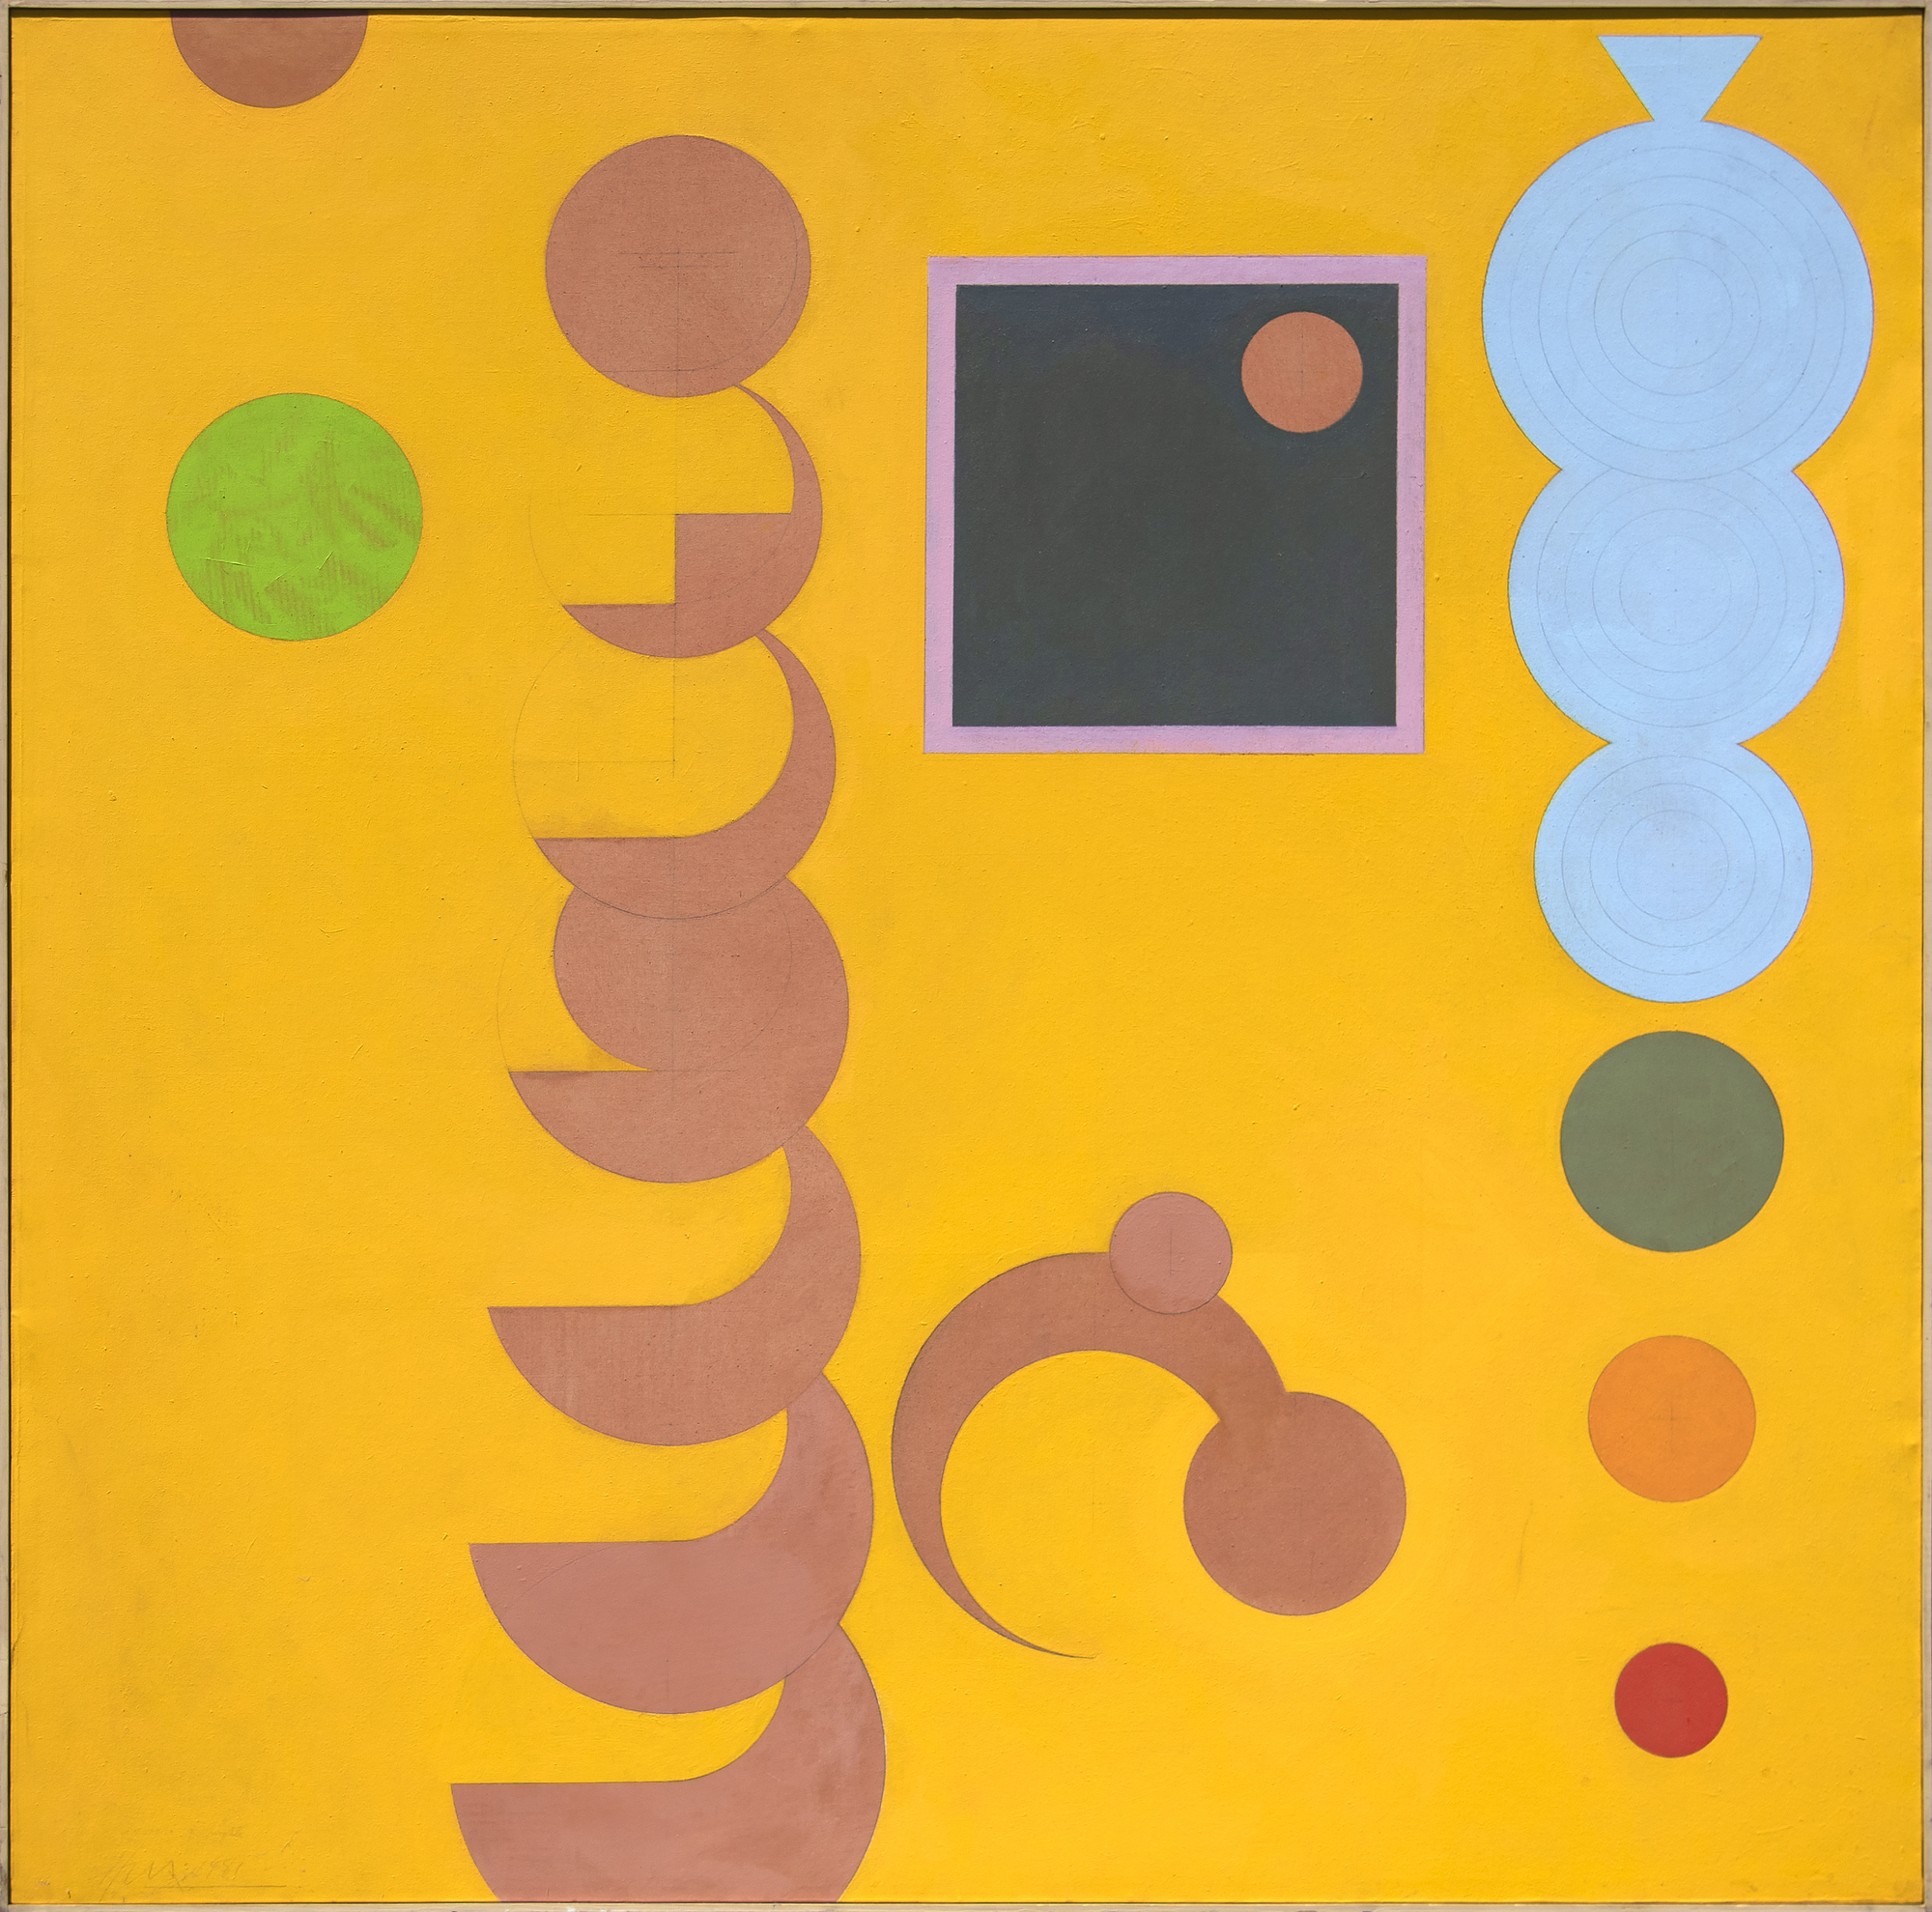 HASSEL SMITH - 9000 and 9 Nights - acrylic and graphite on canvas - 68 x 68 1/8 in.